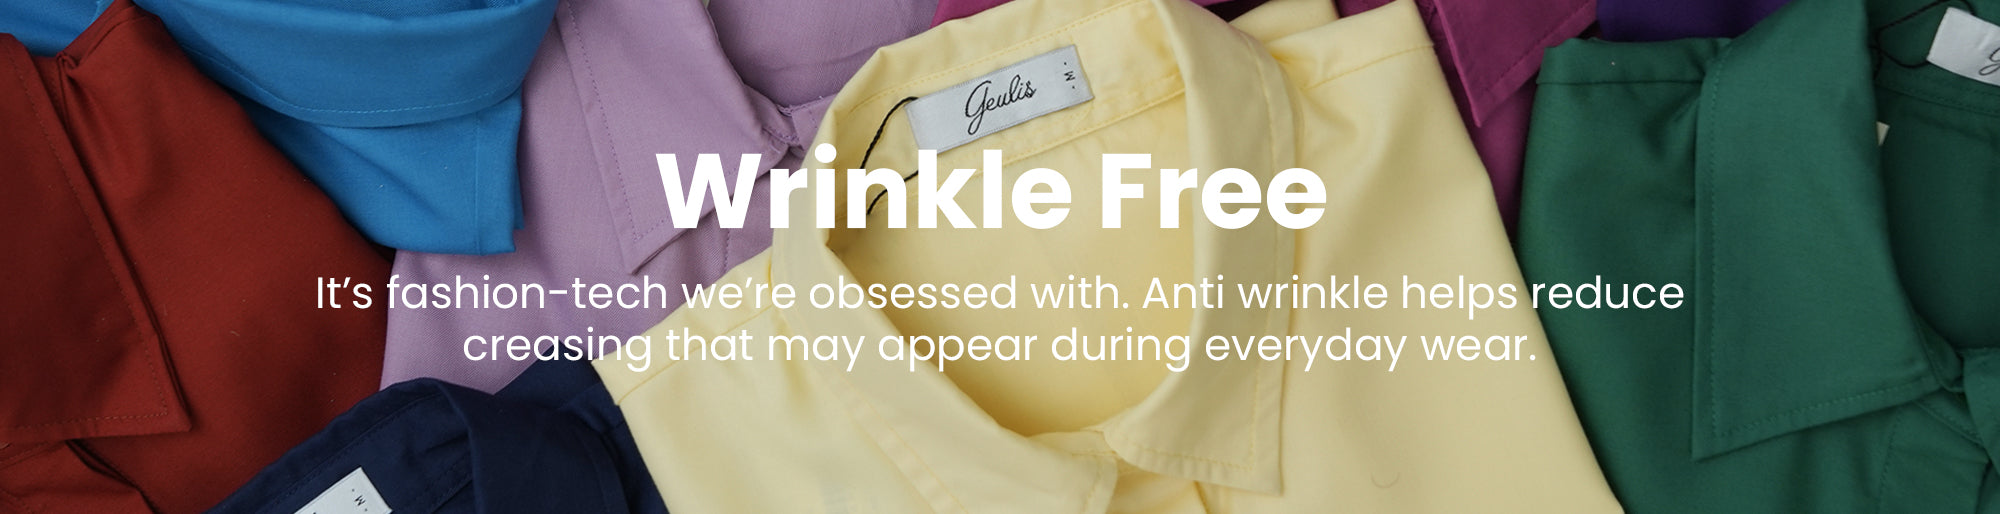 Our Wrinkle-Free Collection